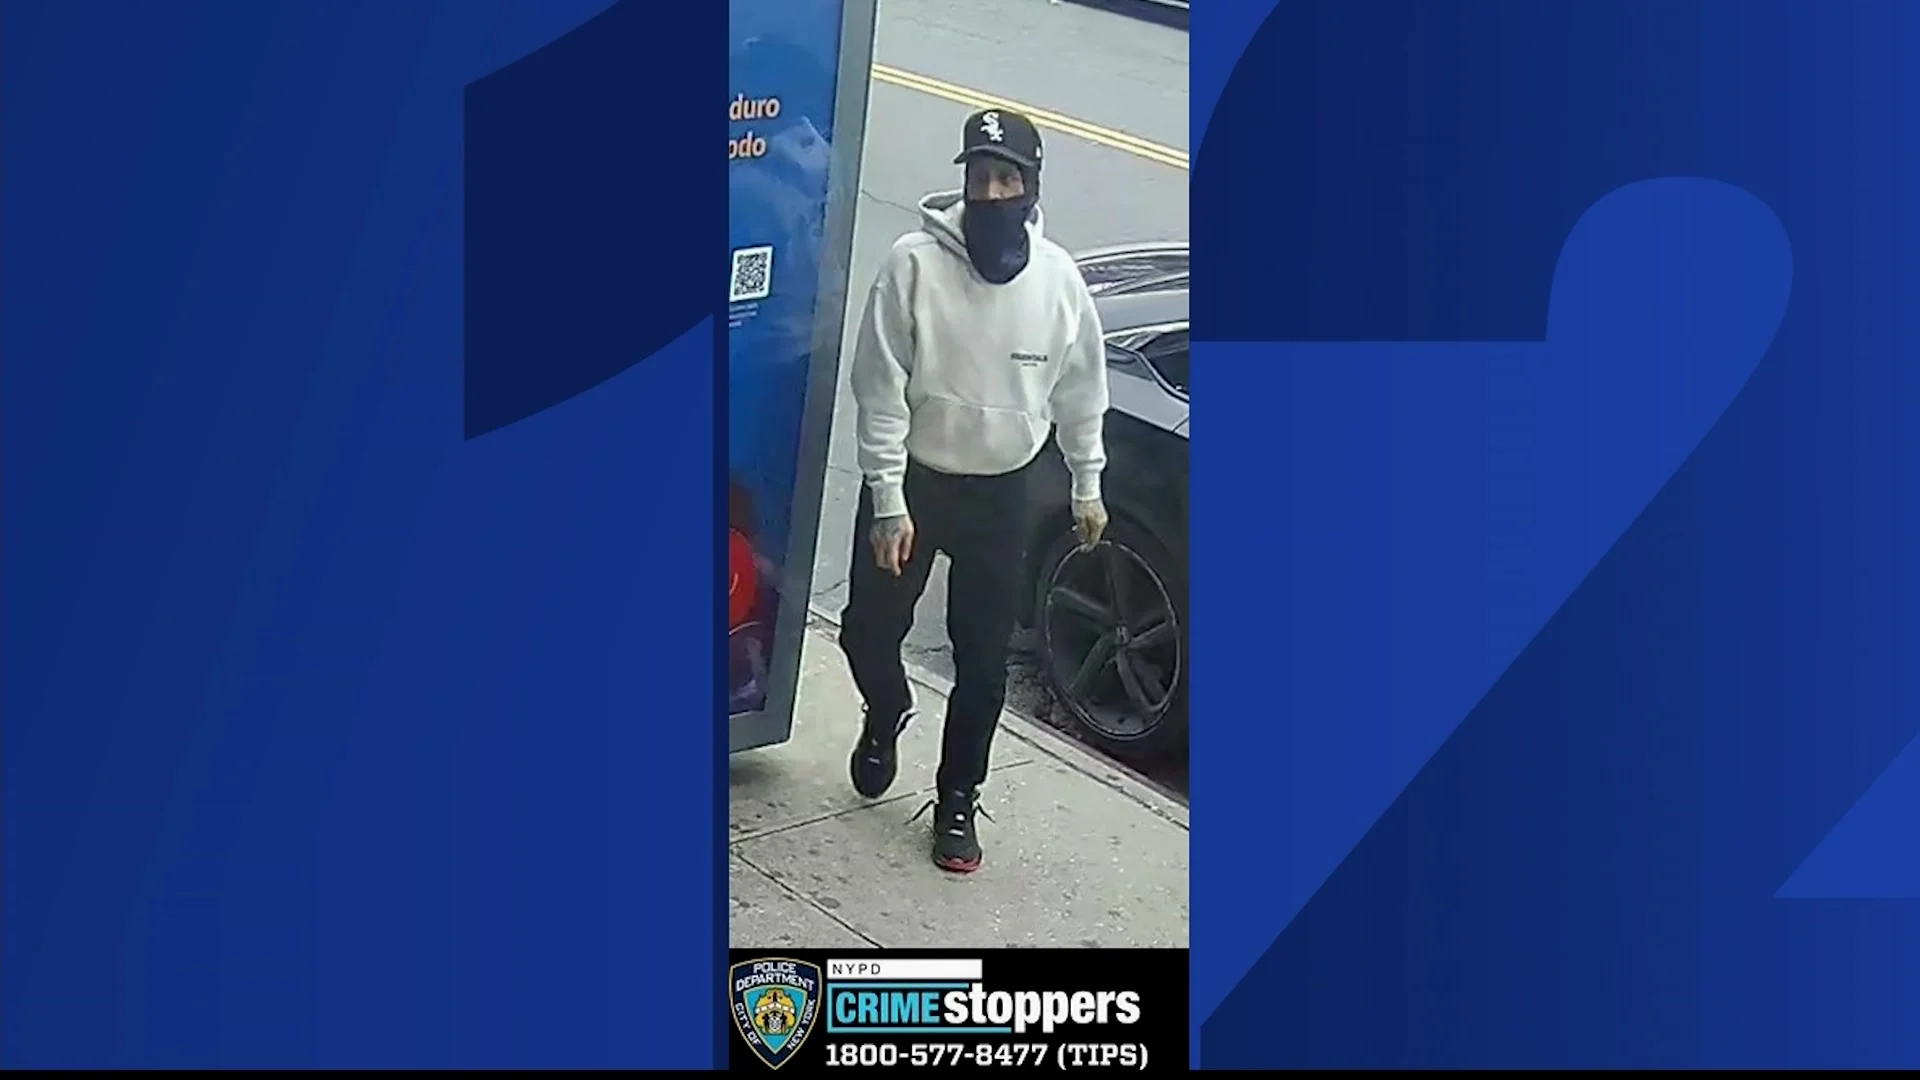 NYPD: Suspect wanted for multiple robberies in the Bronx